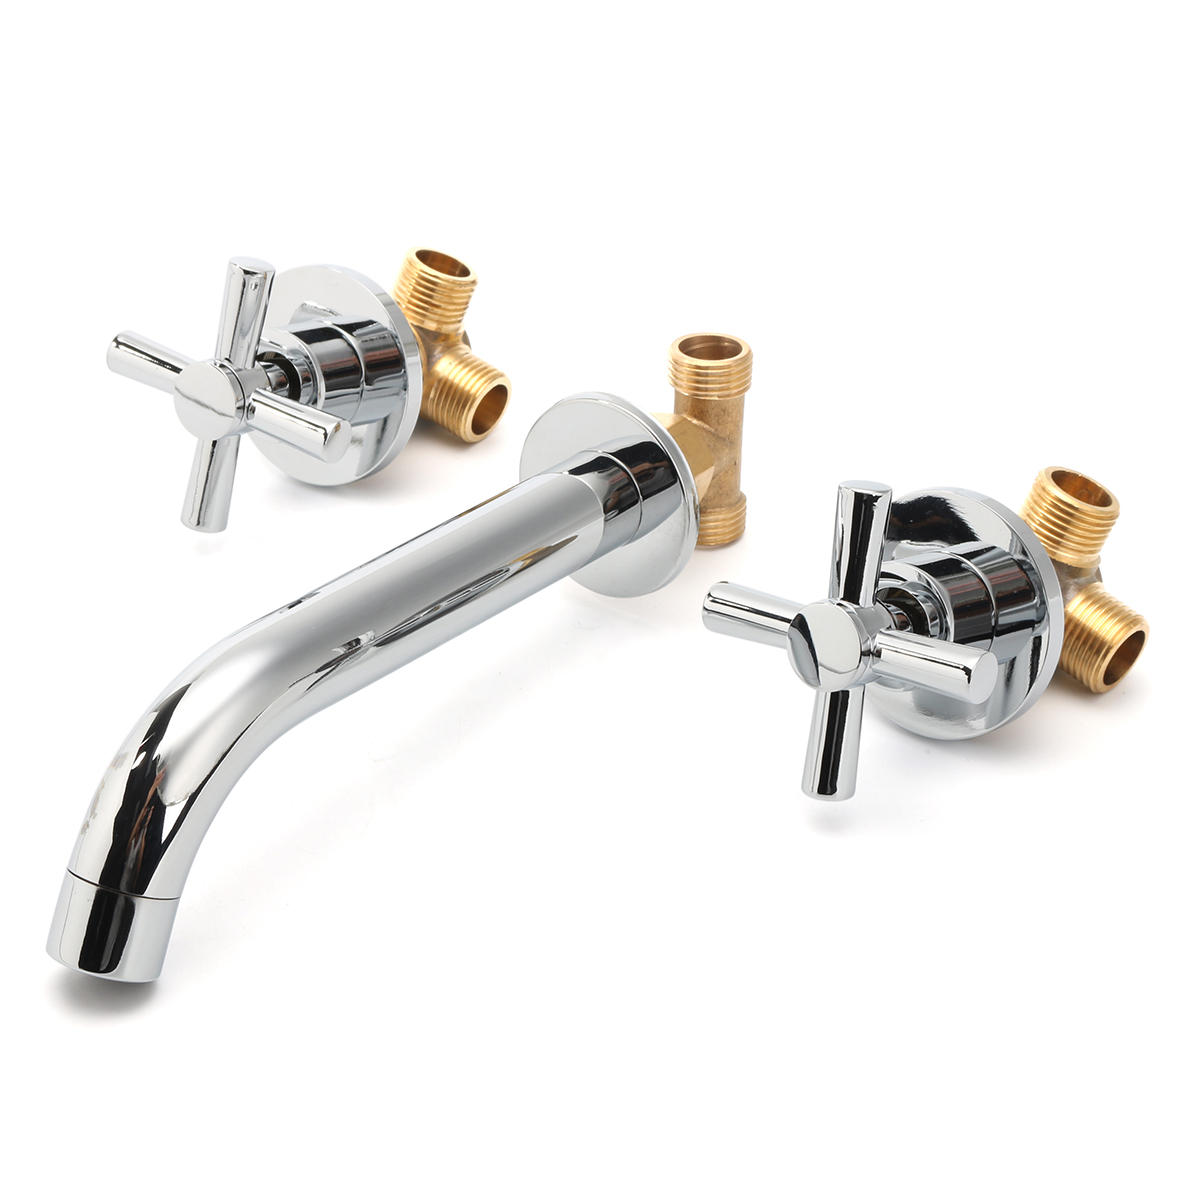 3 Hole Cross Handles Wall Mounted Basin Mixer Tap Copper Faucet